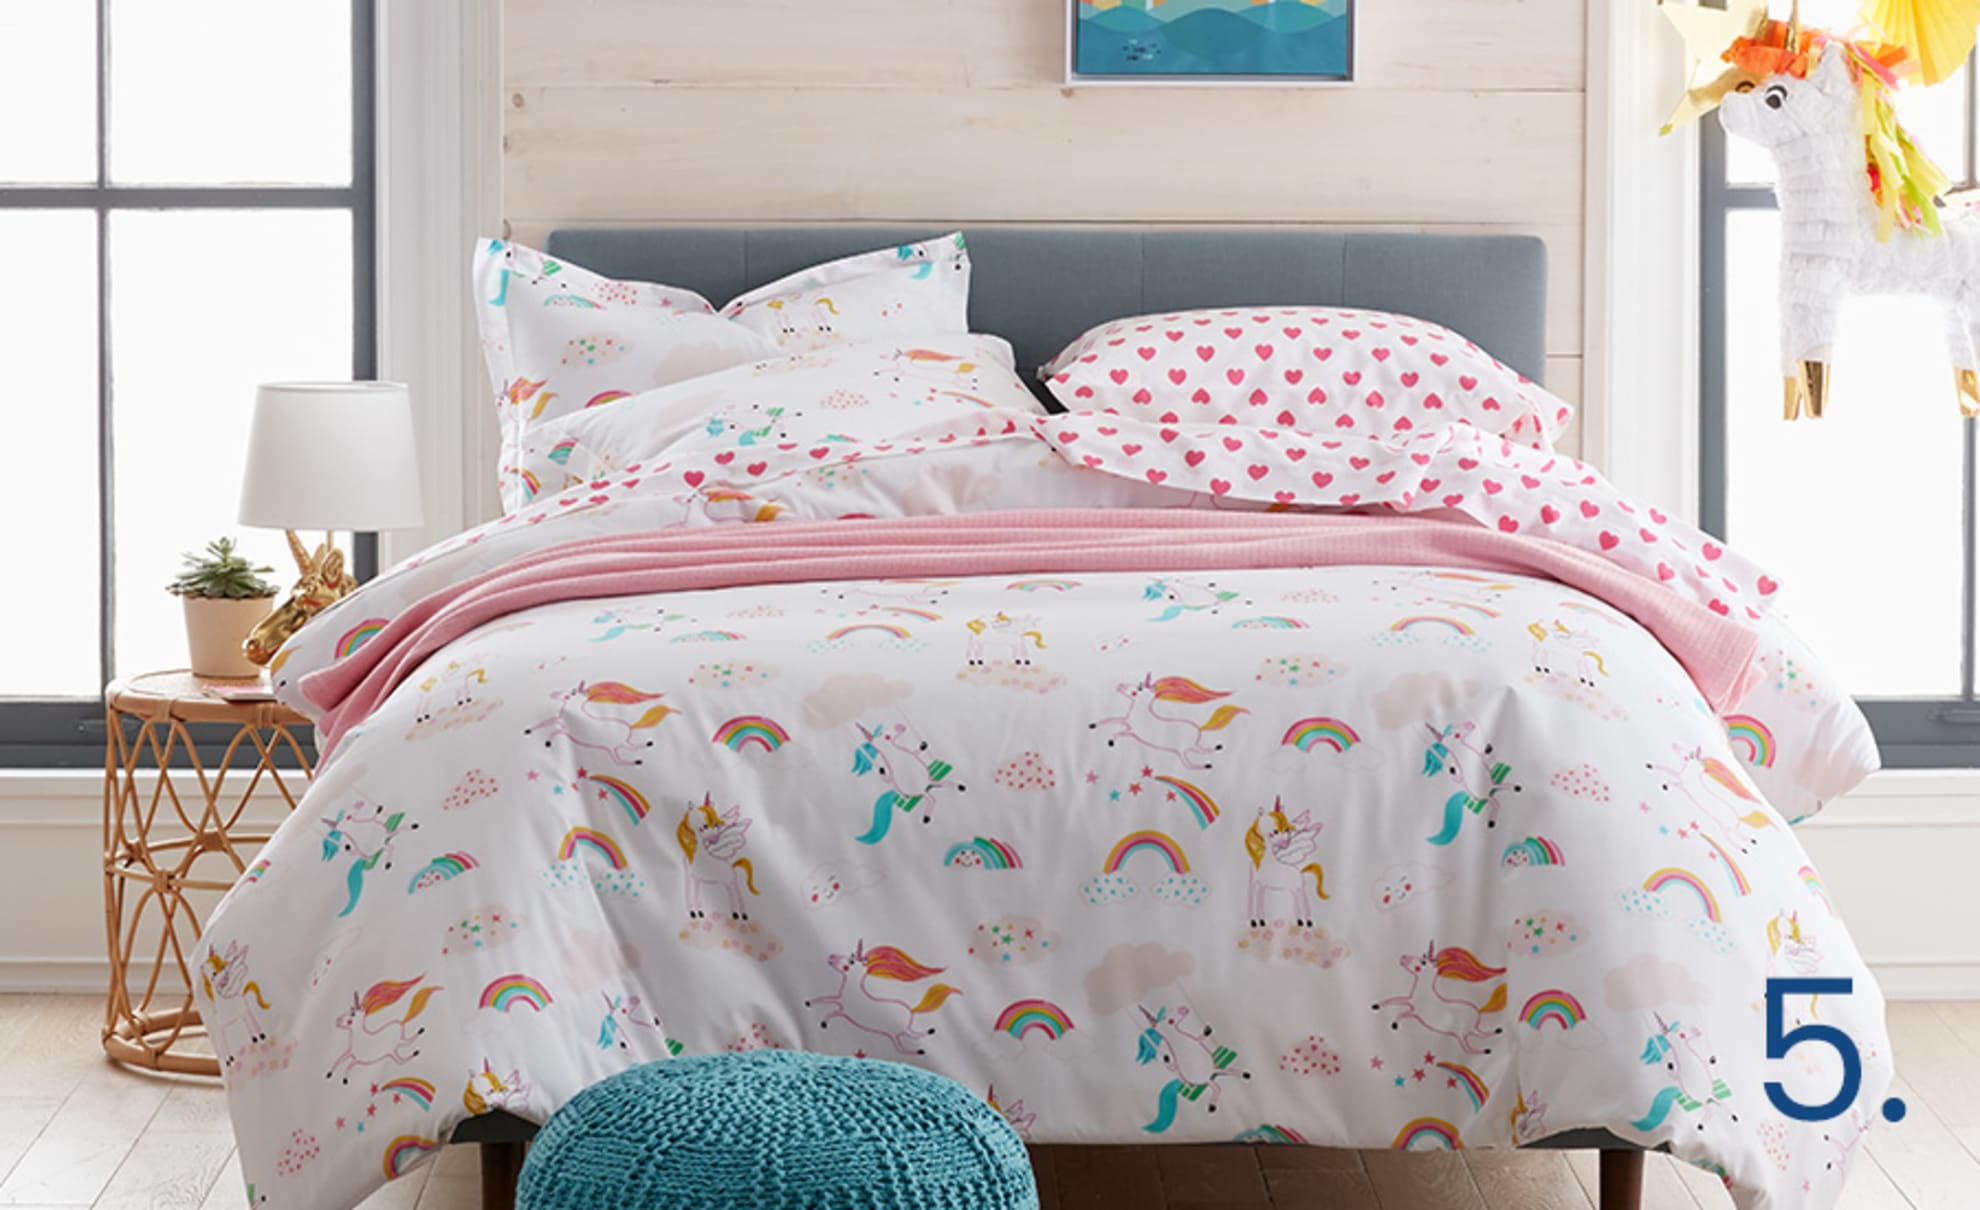 Tips for Beautiful, Coordinated Bedding | The Company Store